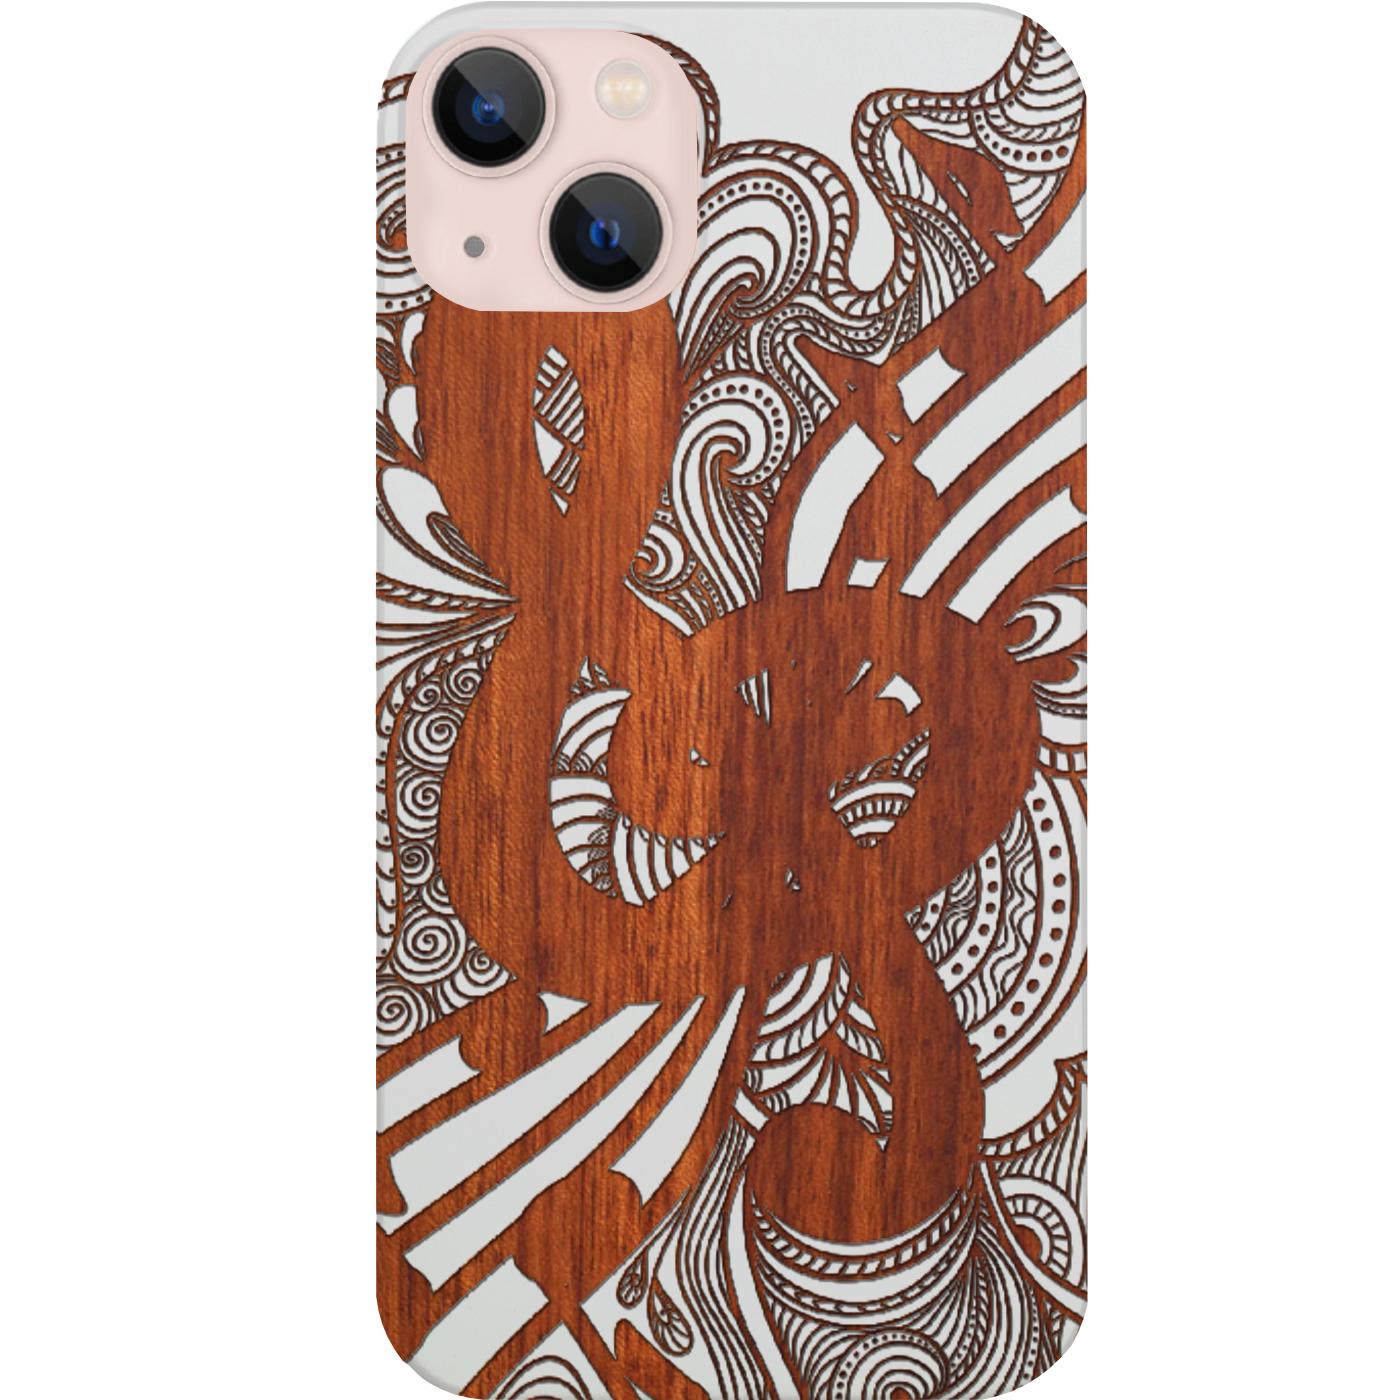 Clef 3 - Engraved Phone Case